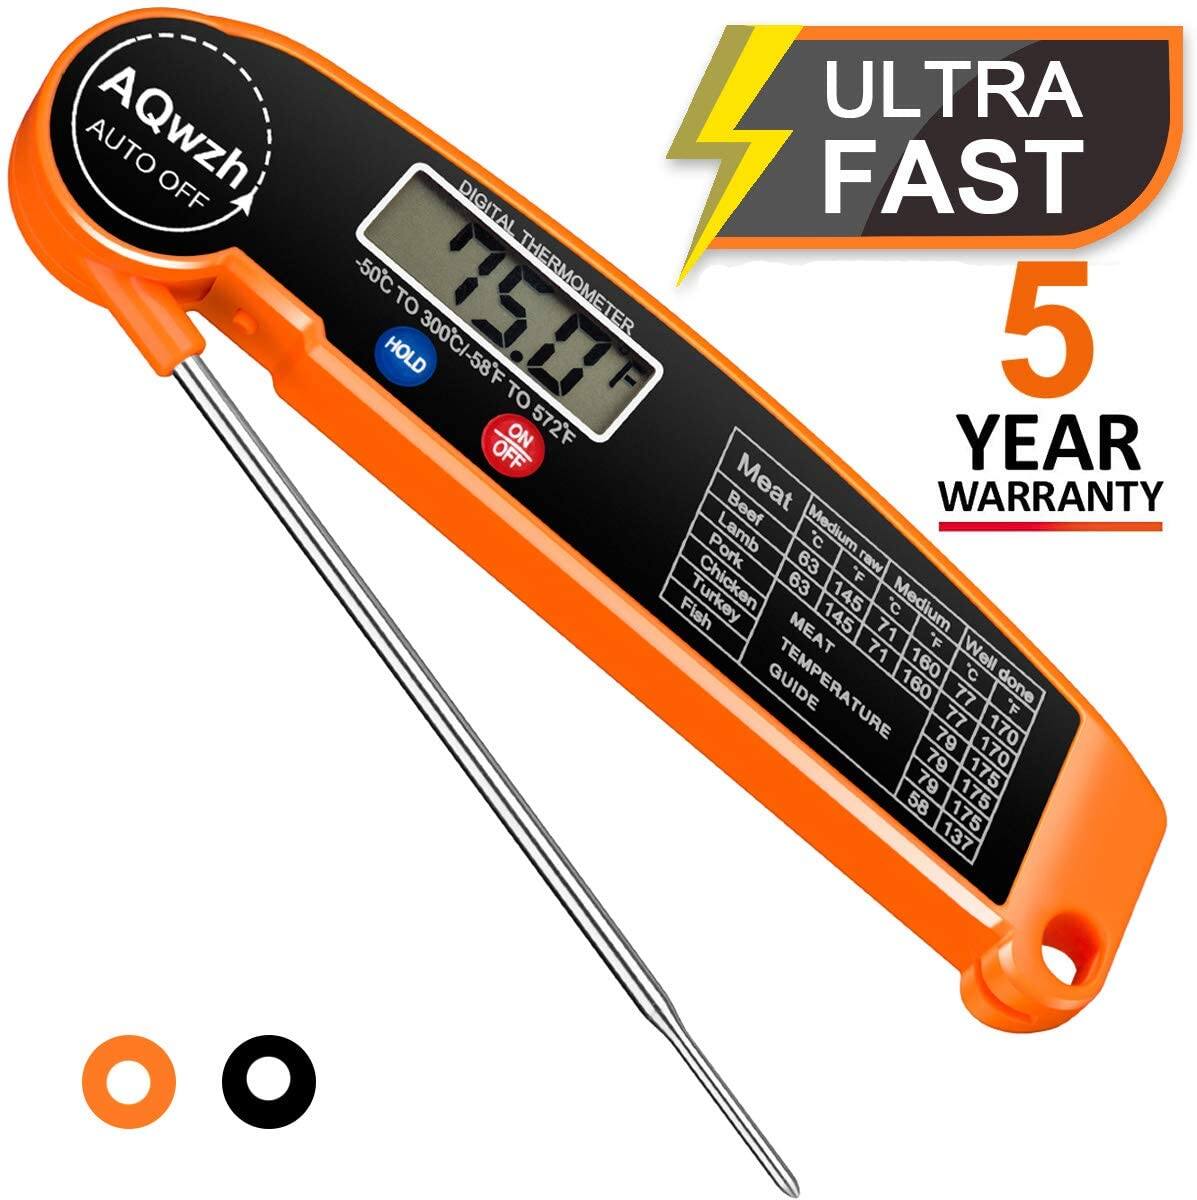 AQwzh Meat Thermometer Instant Read for $7.46 at Walmart